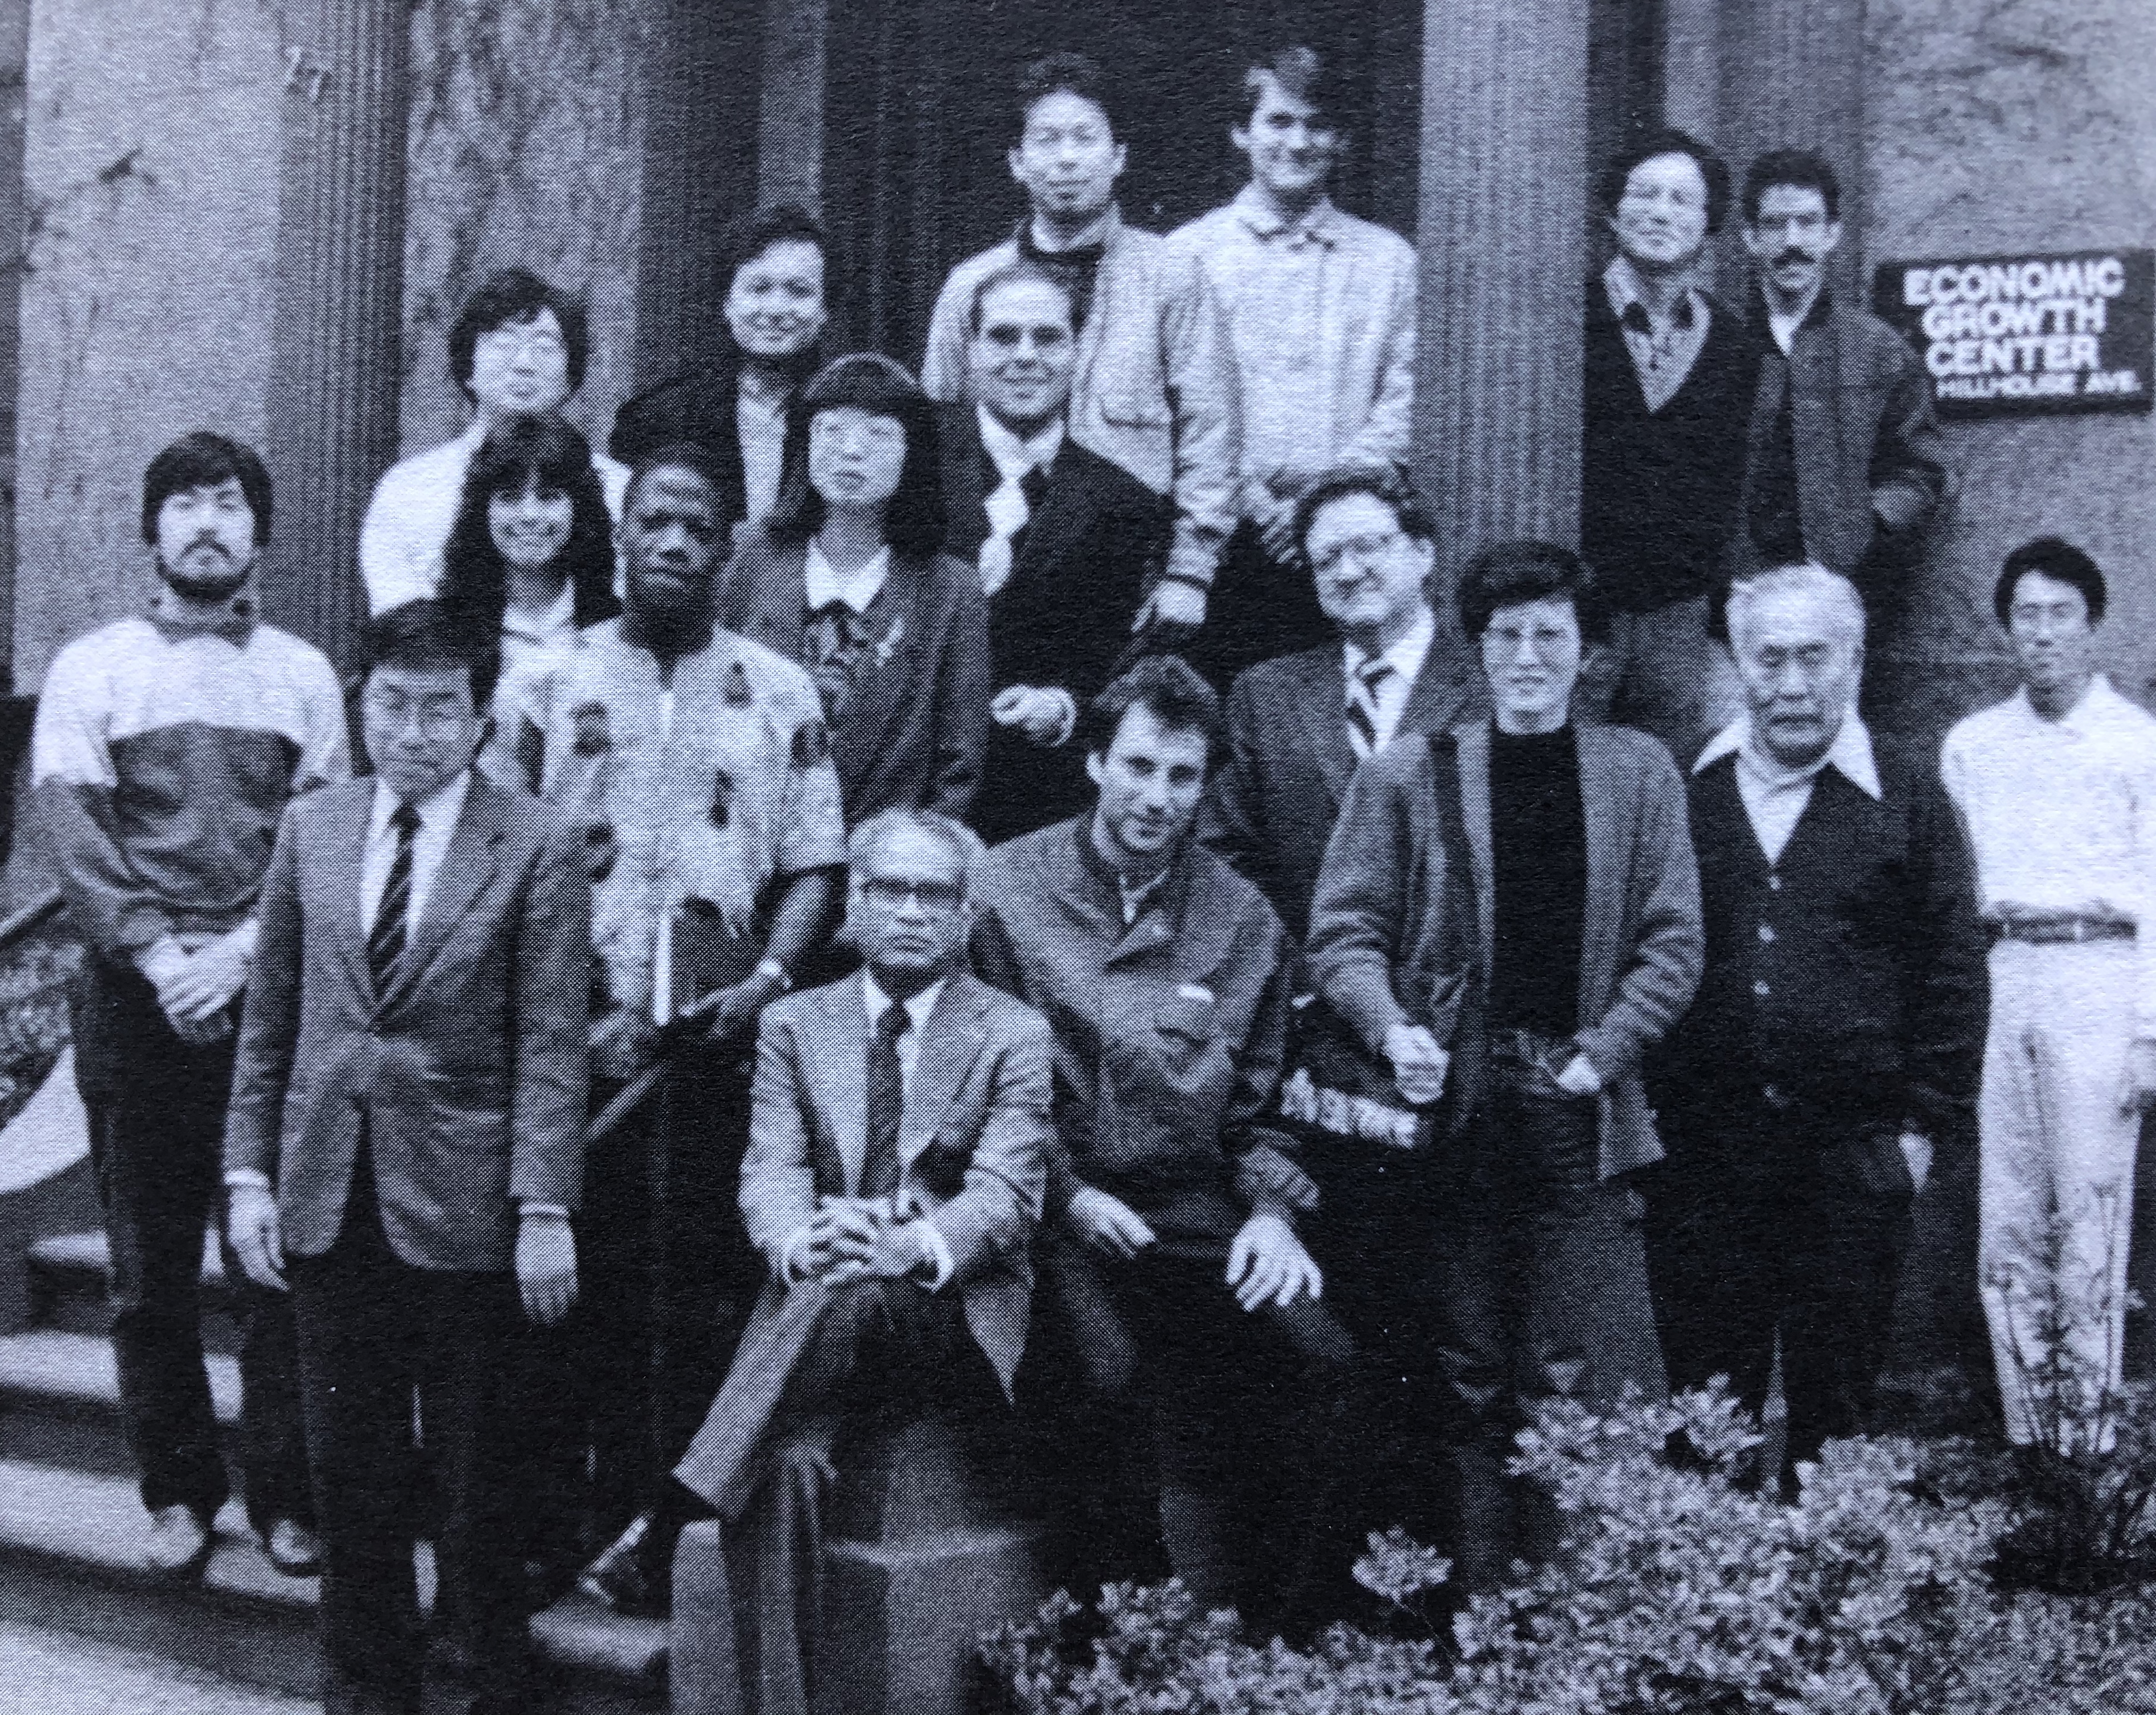 A group of 15 international students pose with professors on the steps of the EGC building